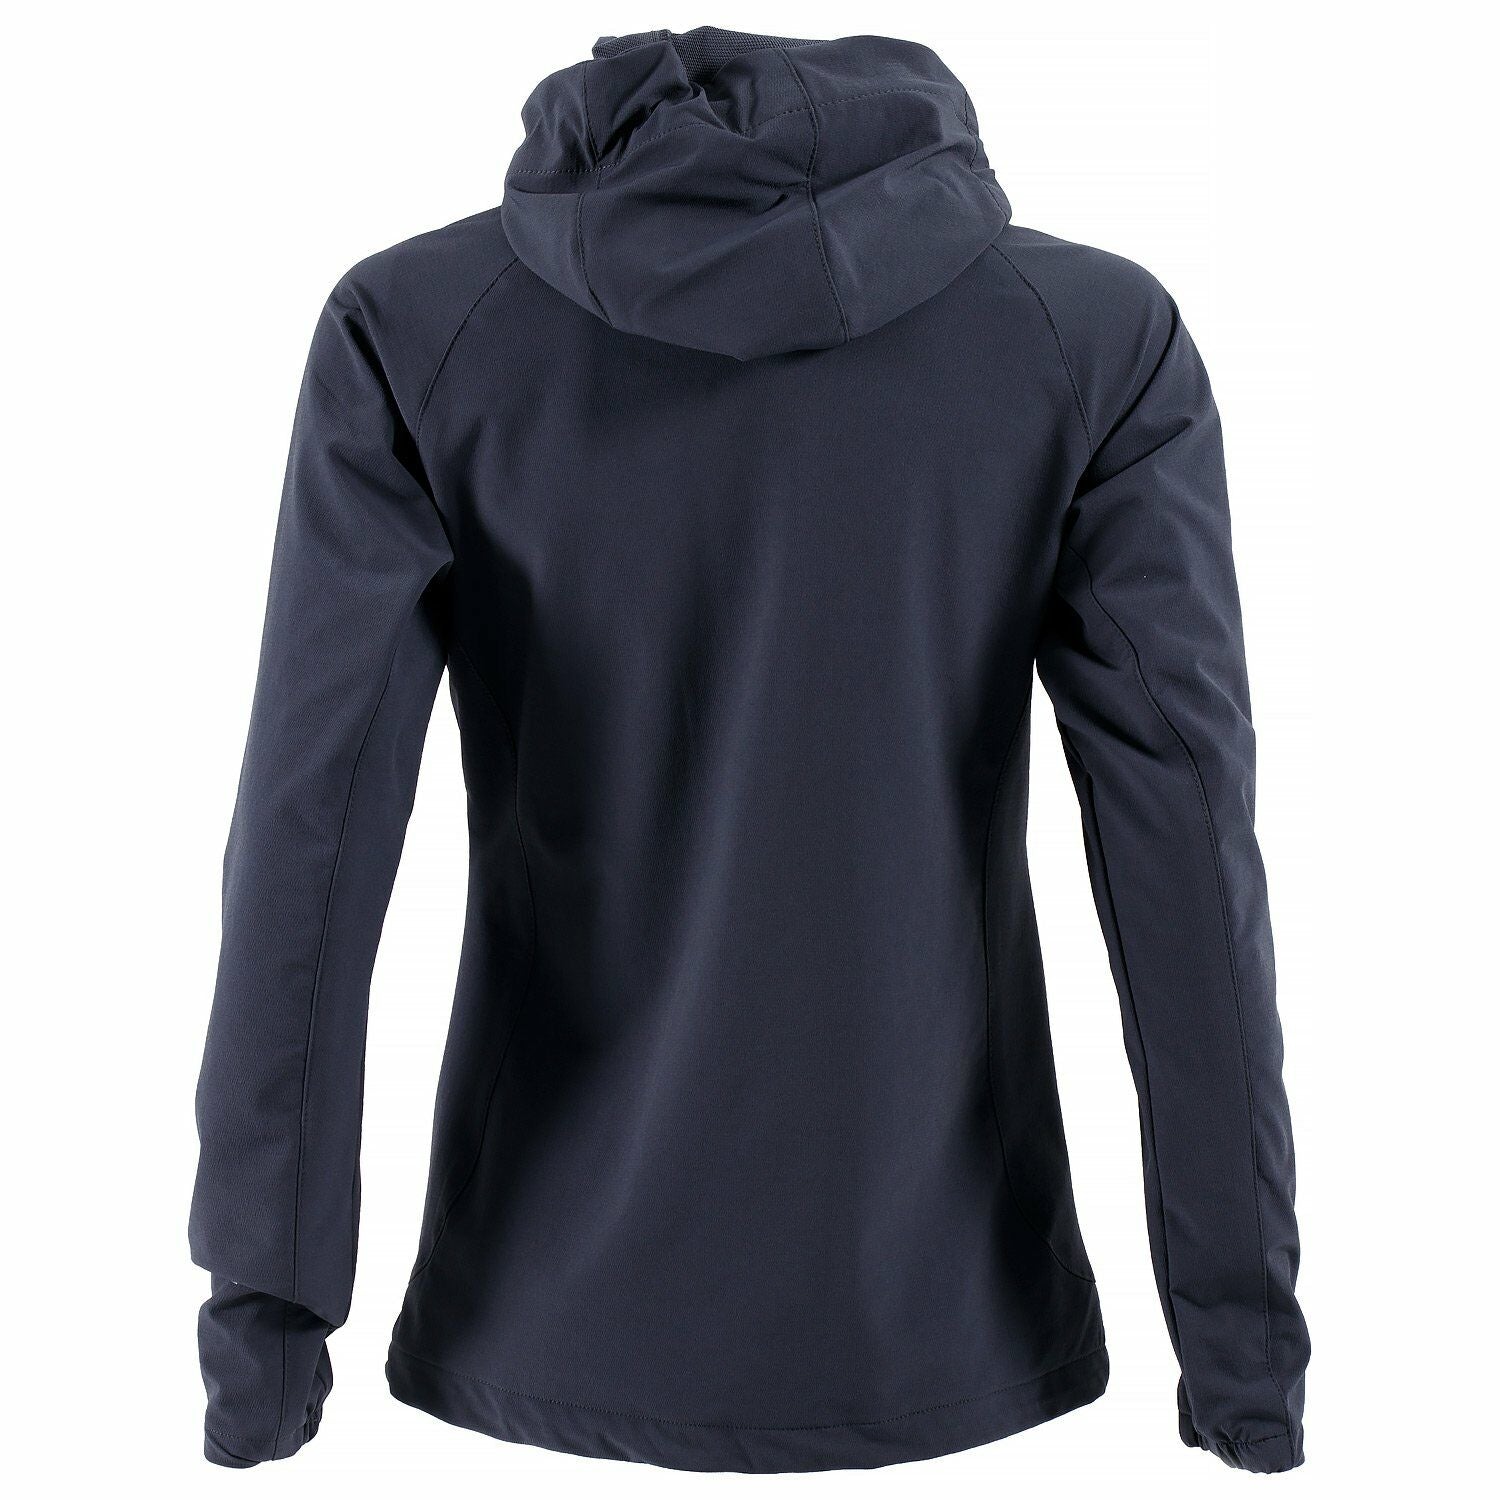 First Ascent Women's Active XT-3 Softshell Jacket